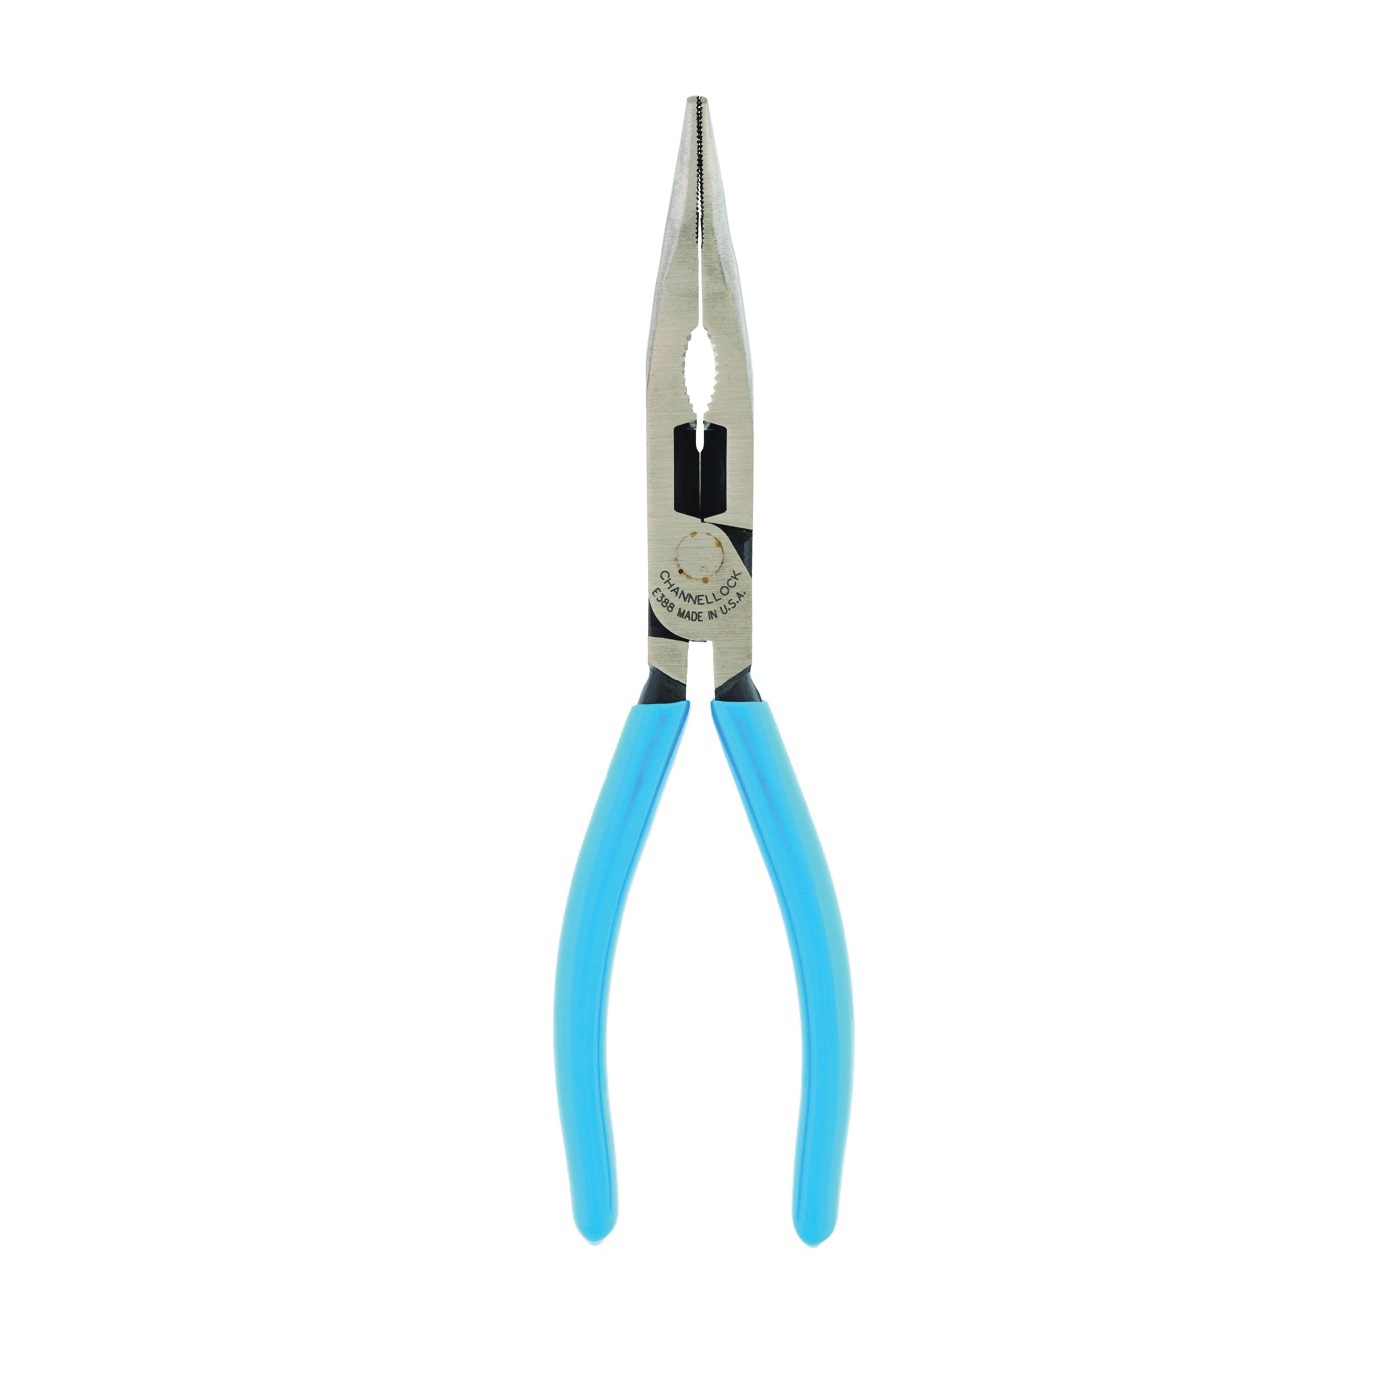 CHANNELLOCK E388 Nose Plier, 7.45 in OAL, Blue/Red Handle, Comfort-Grip Handle, 0.7 in W Jaw, 2.6 in L Jaw